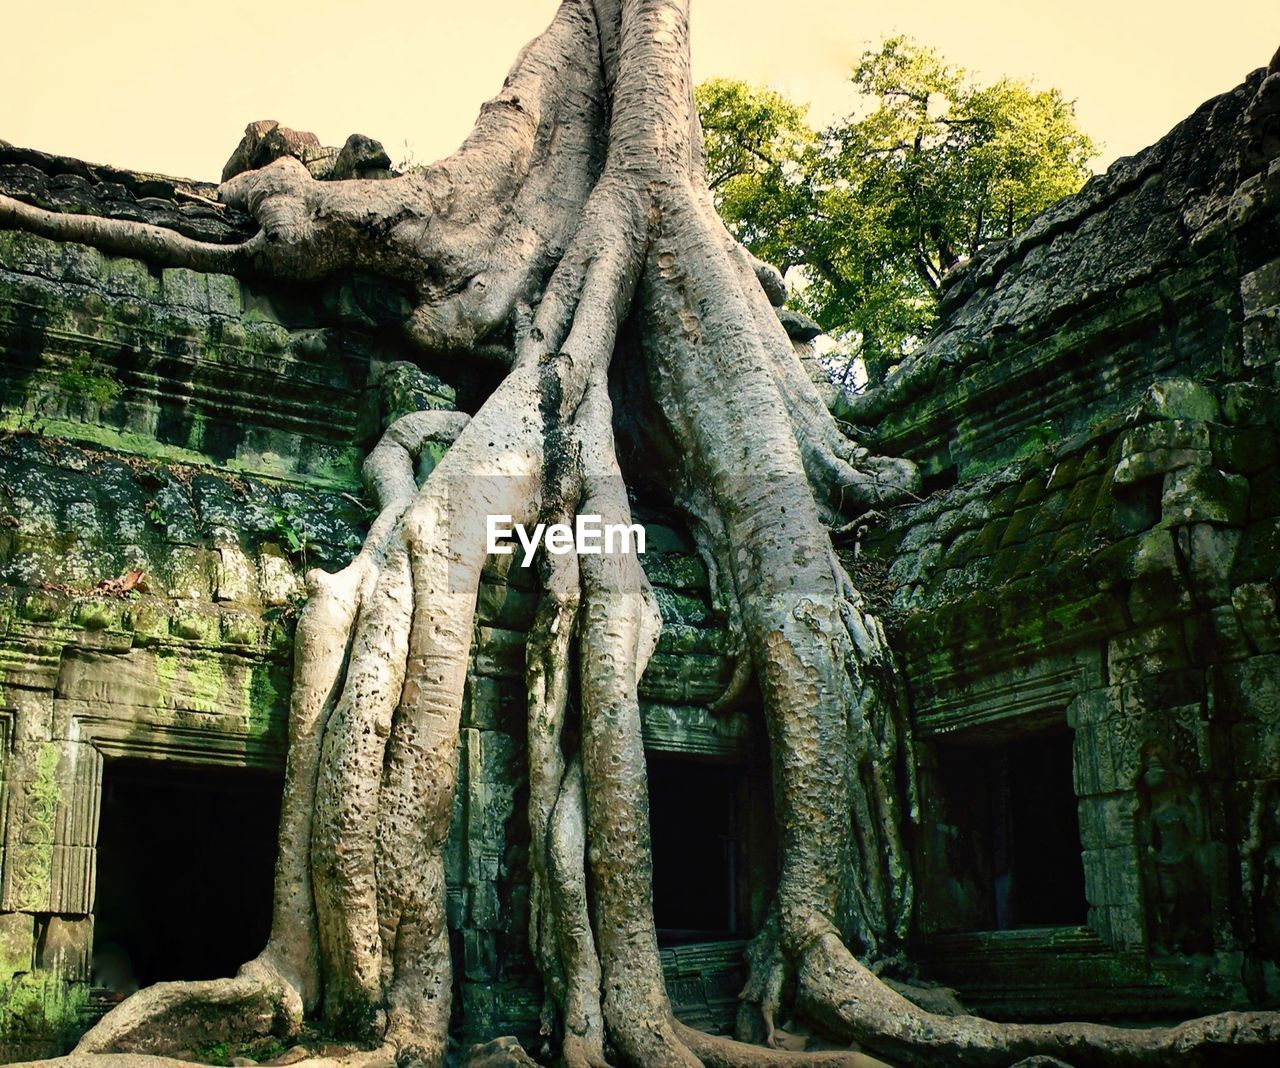 Tree growing on ancient structure